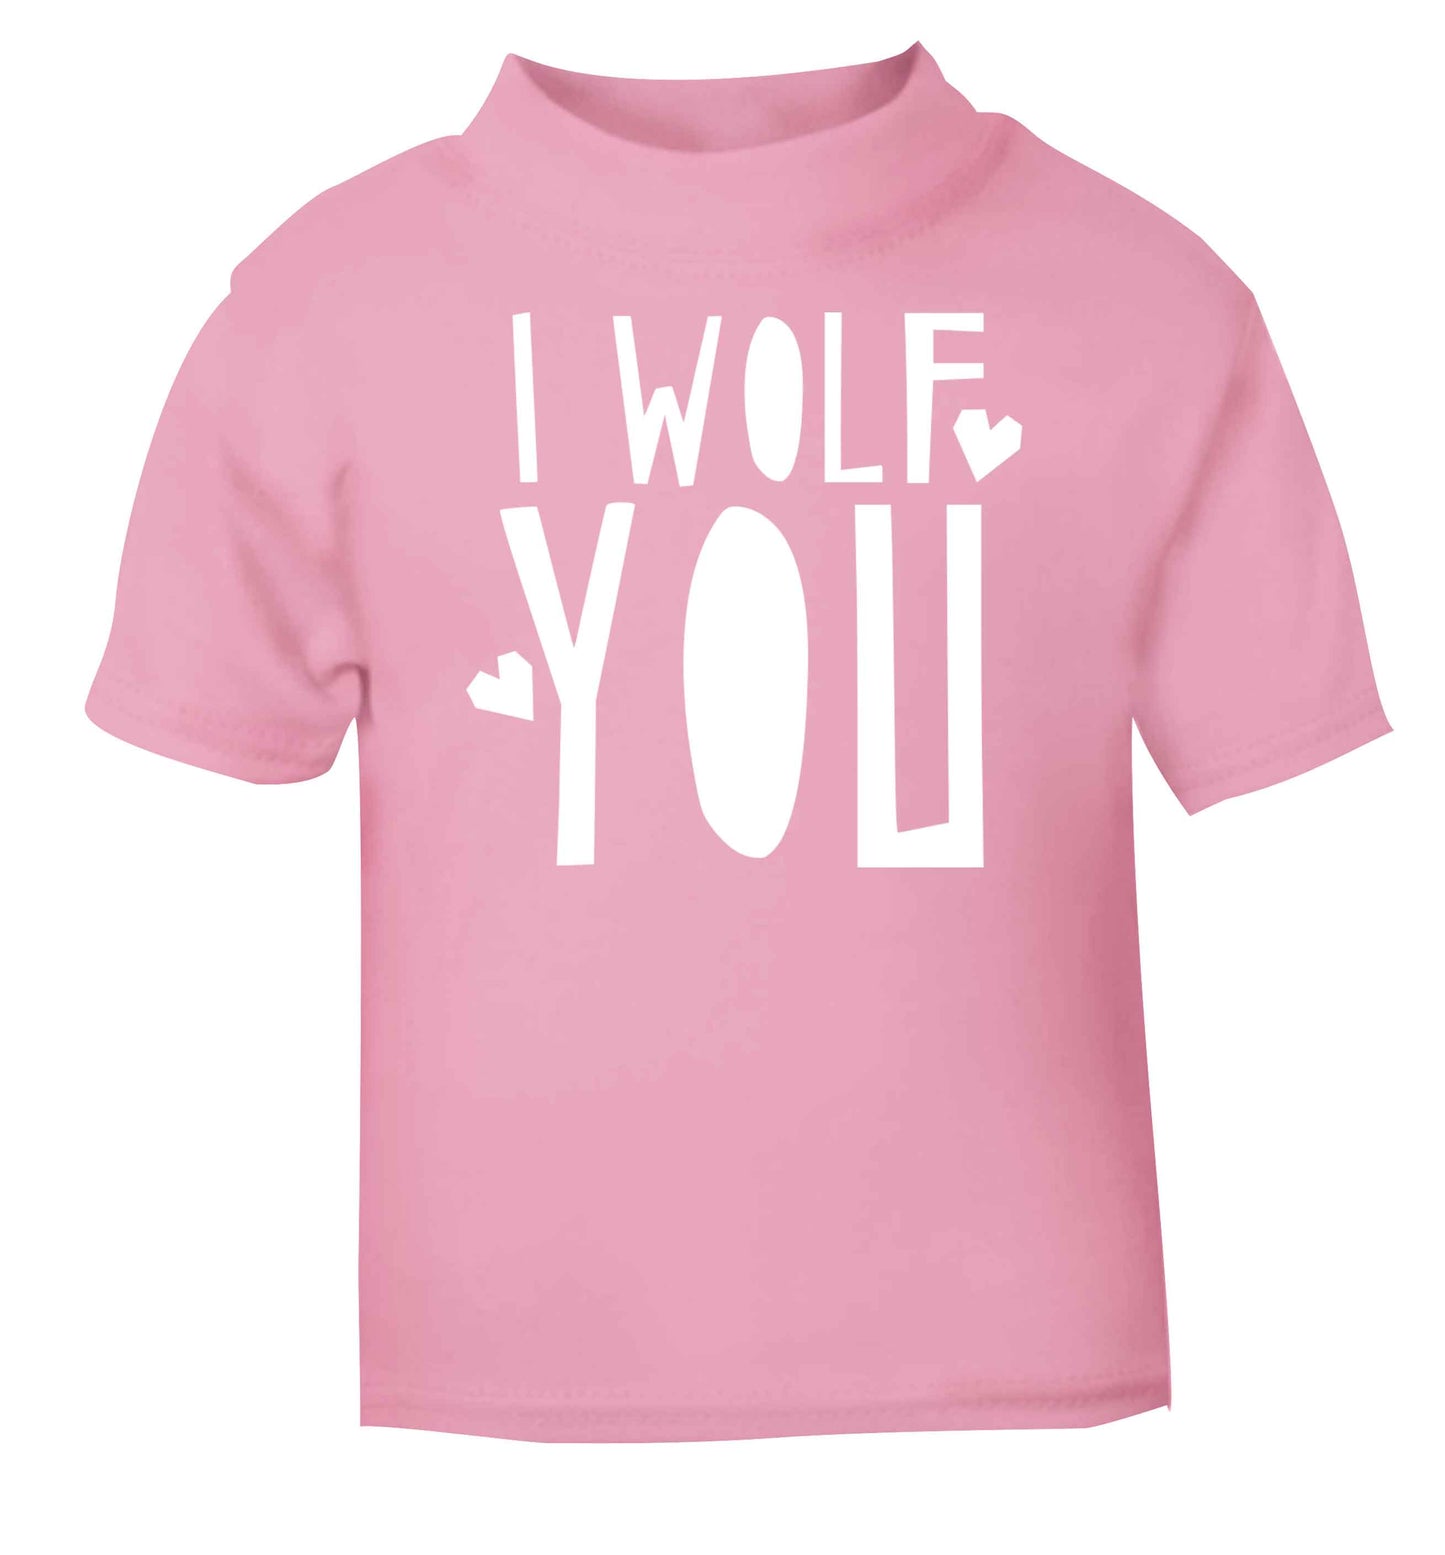 I wolf you light pink baby toddler Tshirt 2 Years